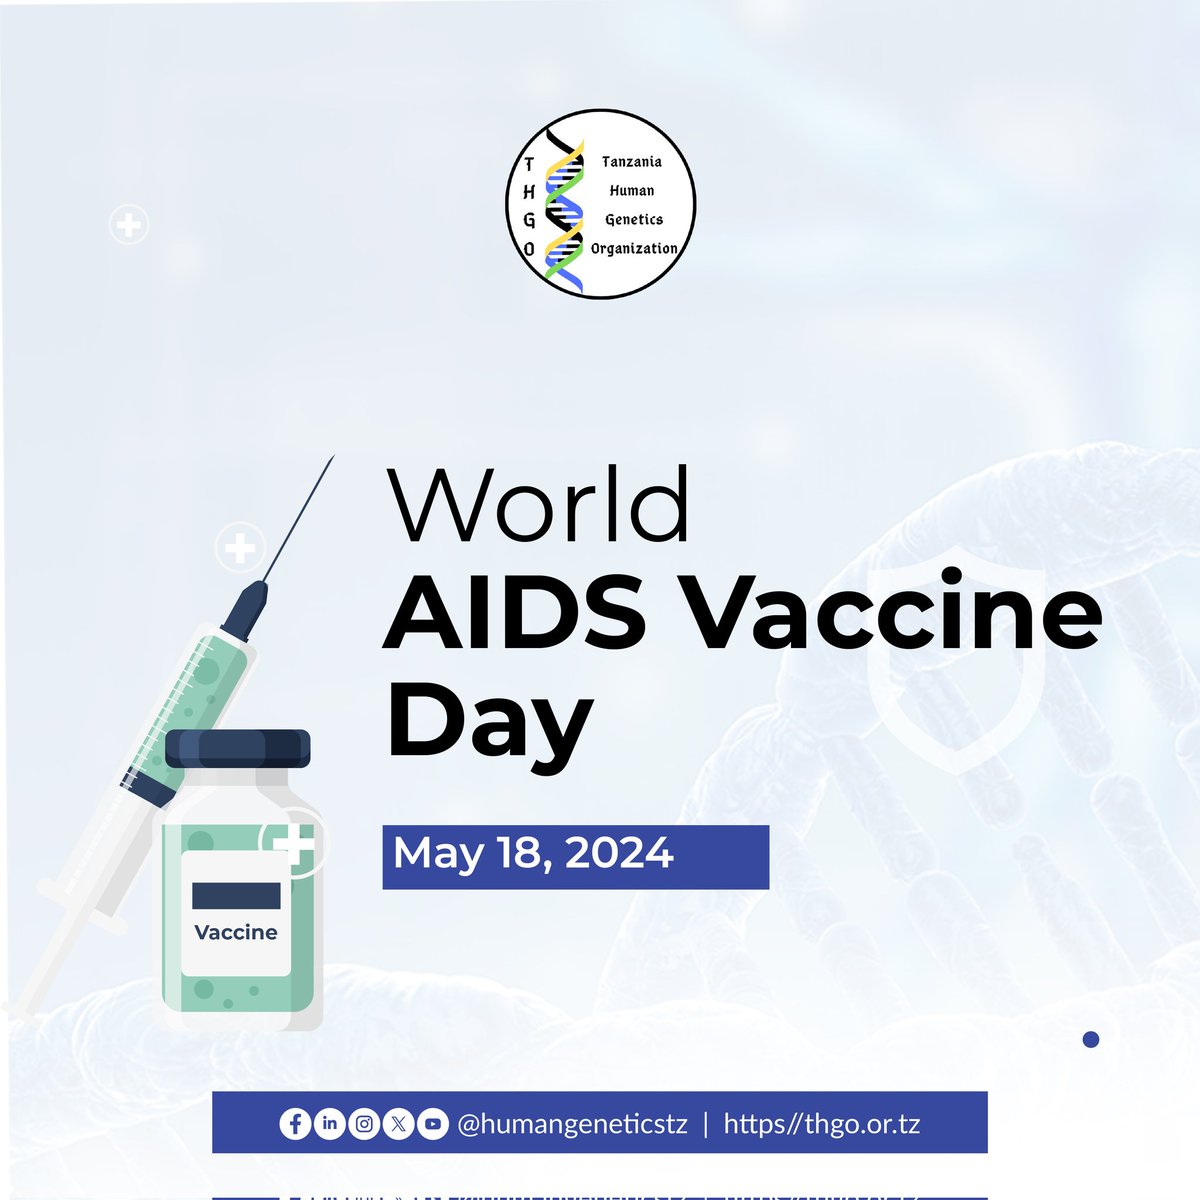 🌍 Yesterday was #WorldAIDSVaccineDay💉

🎗️ Let's join hands around the world in educating people about the importance of AIDs Vaccines. 

Content & Artwork by Furahini Mbise 

#AIDSVaccineDay #HumanGenetics